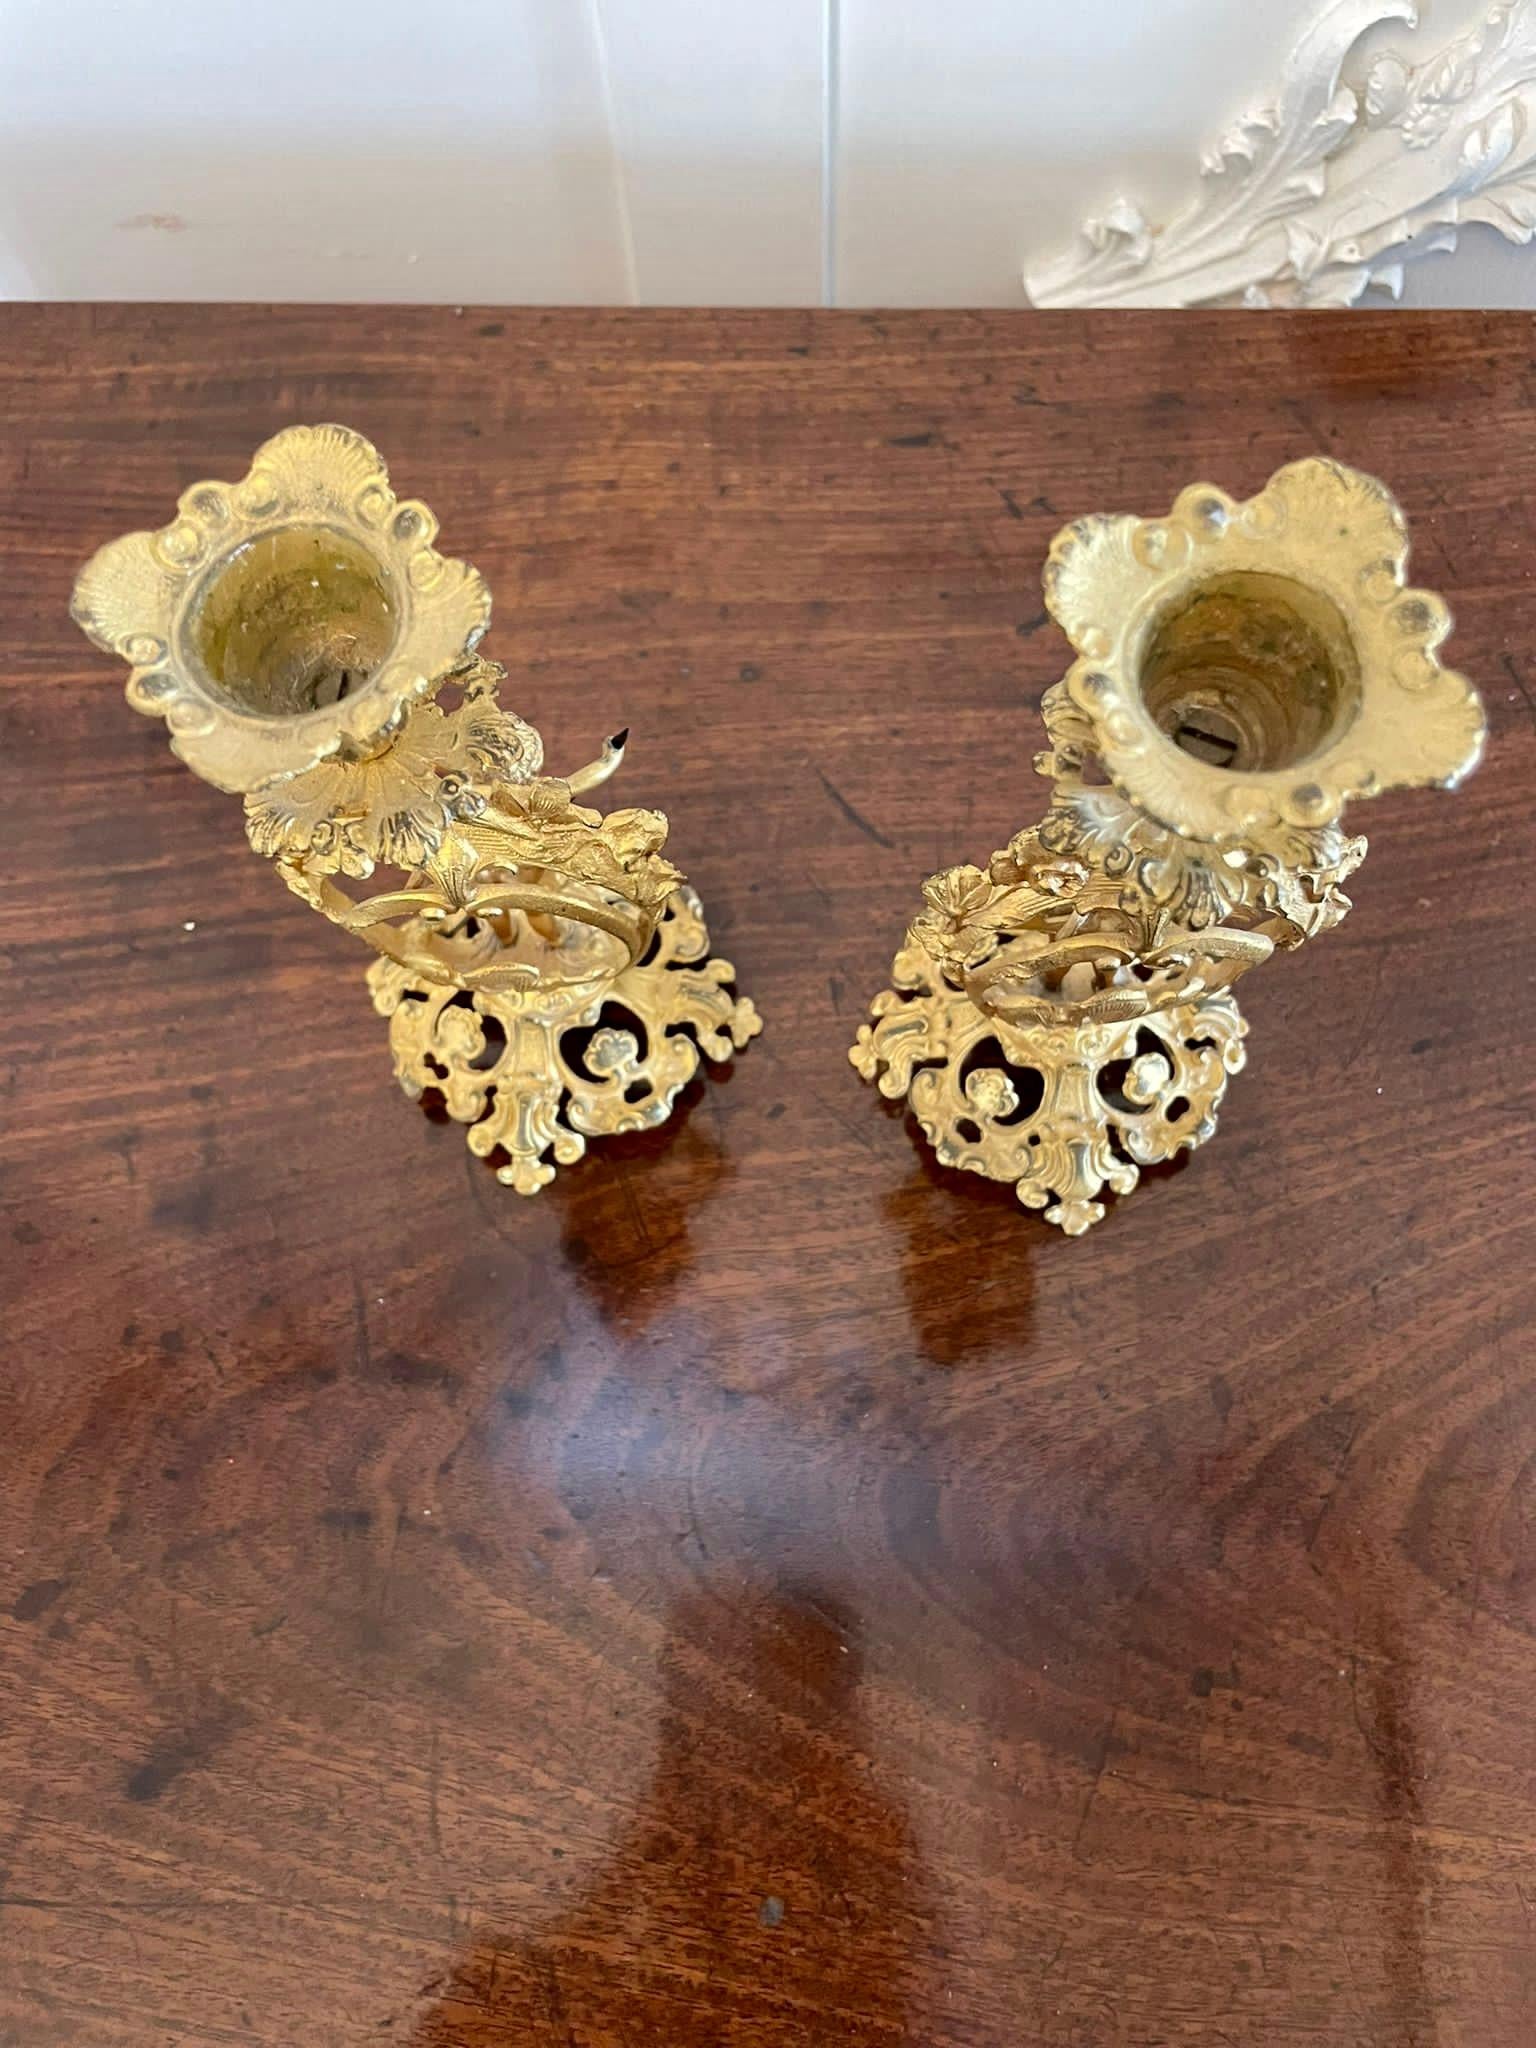 Antique pair of fine French Victorian ornate gilded candlesticks with delightful ornate cupids and flowers.   The candlesticks have attractive shaped tops raised by cupids on an ornate base.

A quaint decorative pair beautifully